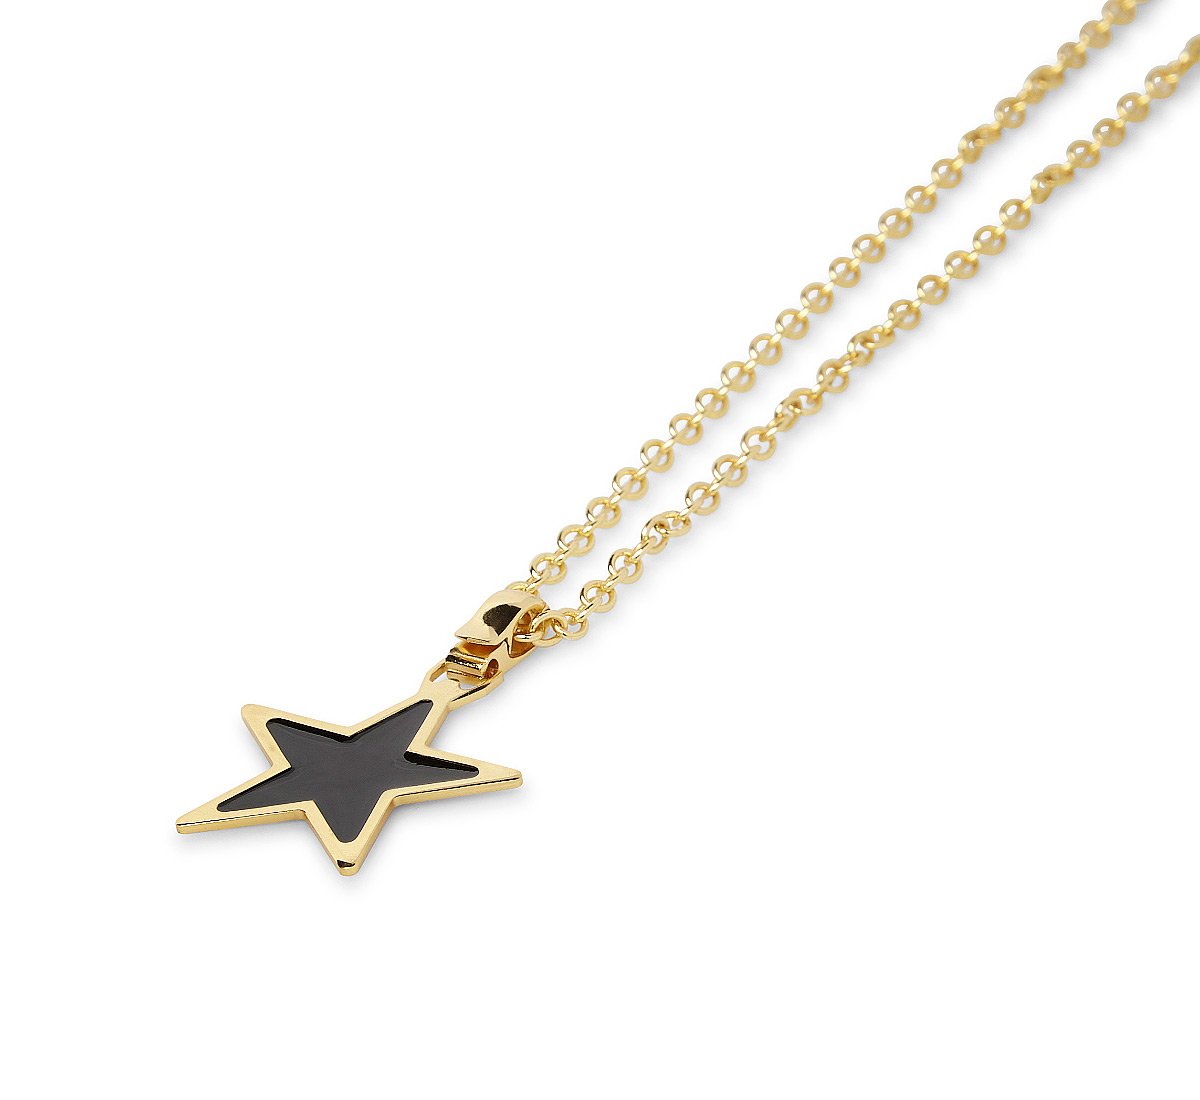 SMALL STAR PENDANT NECKLACE